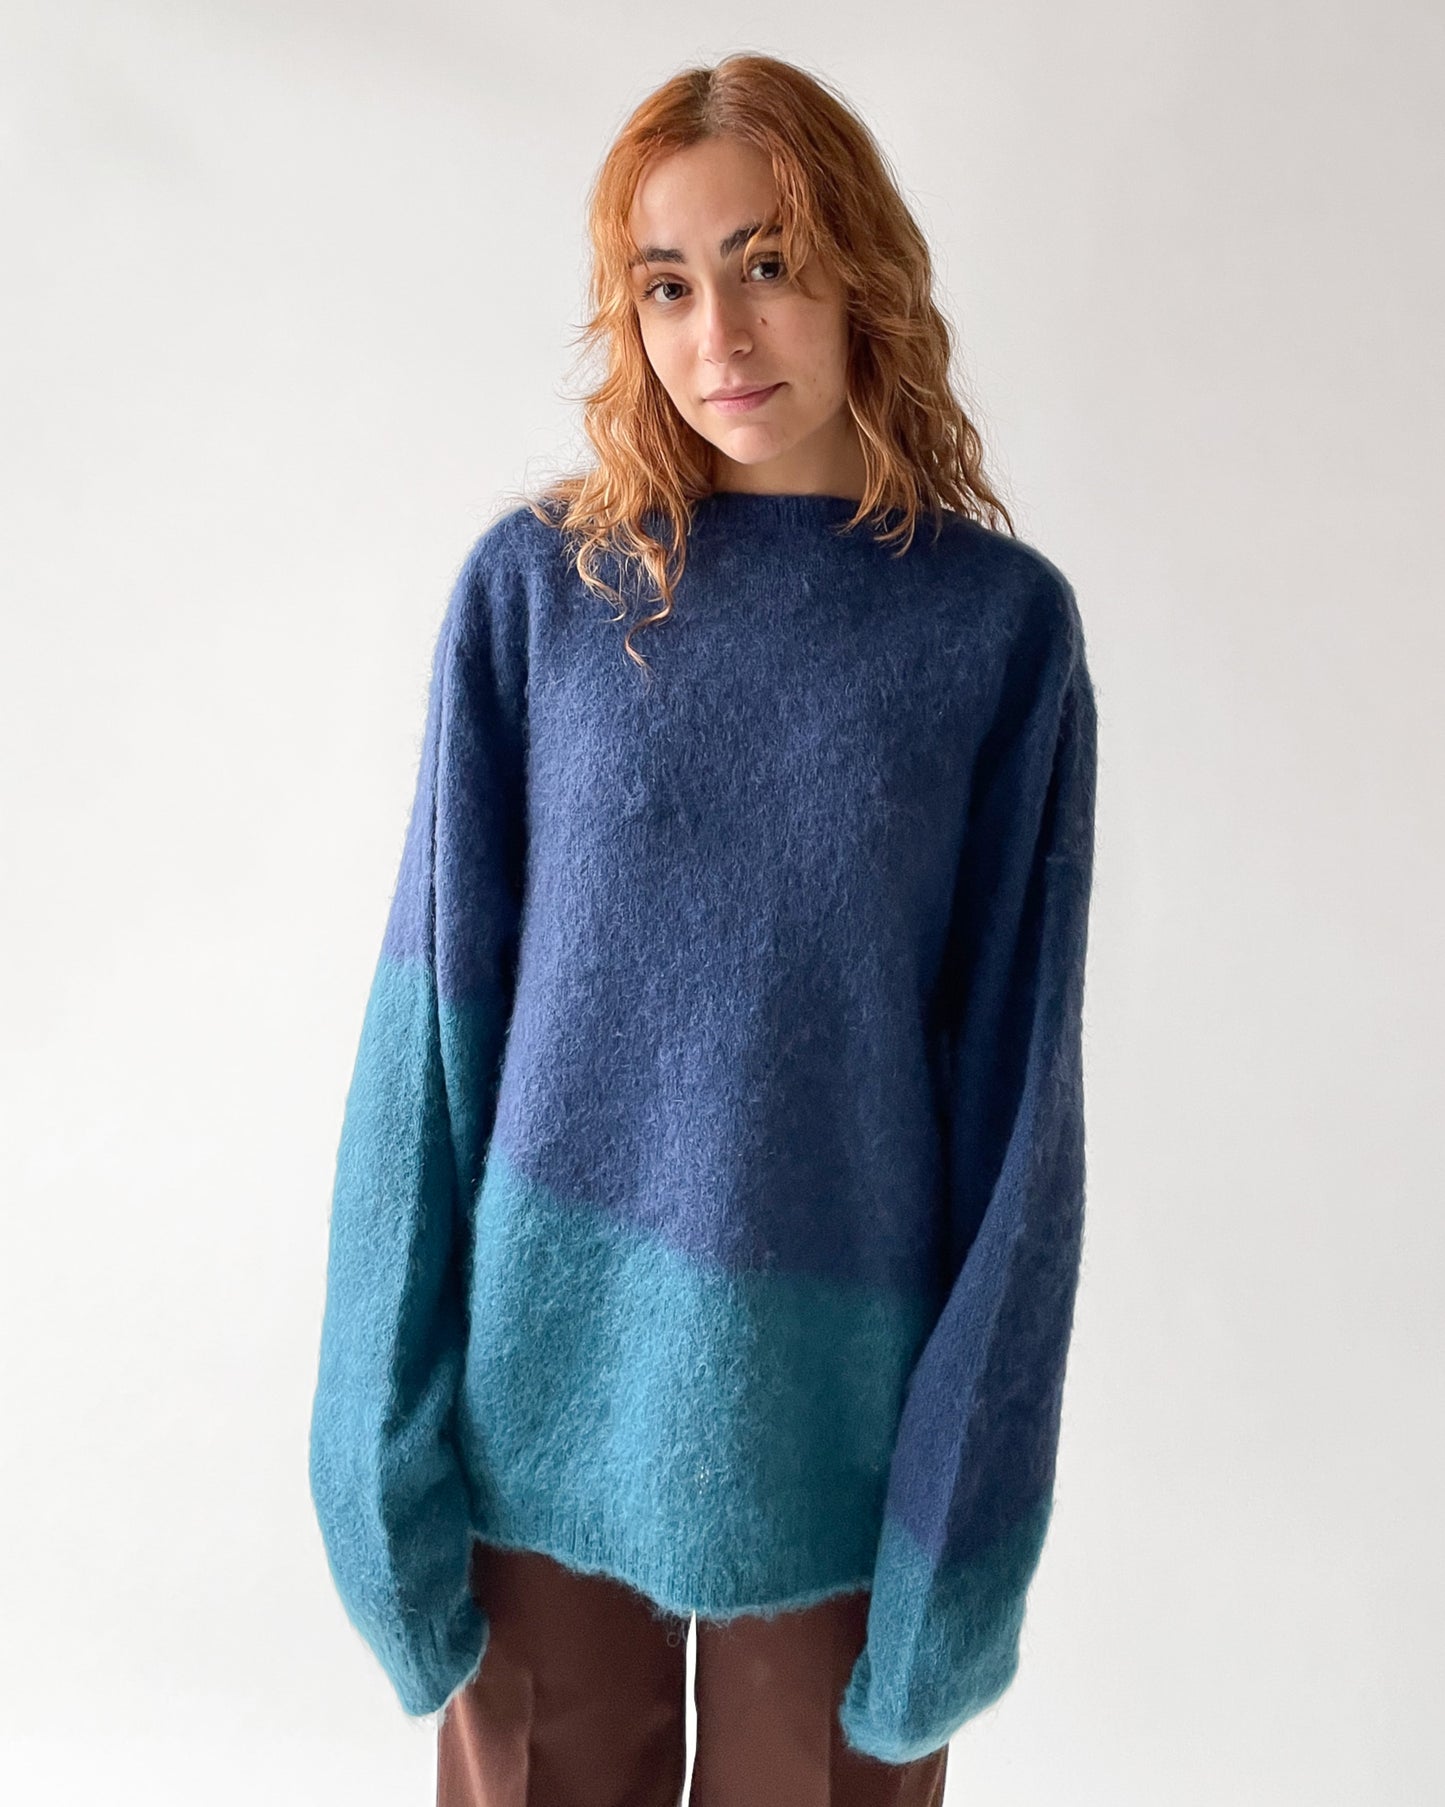 404 Art Inspired Mohair Sweater  Untitled - 1